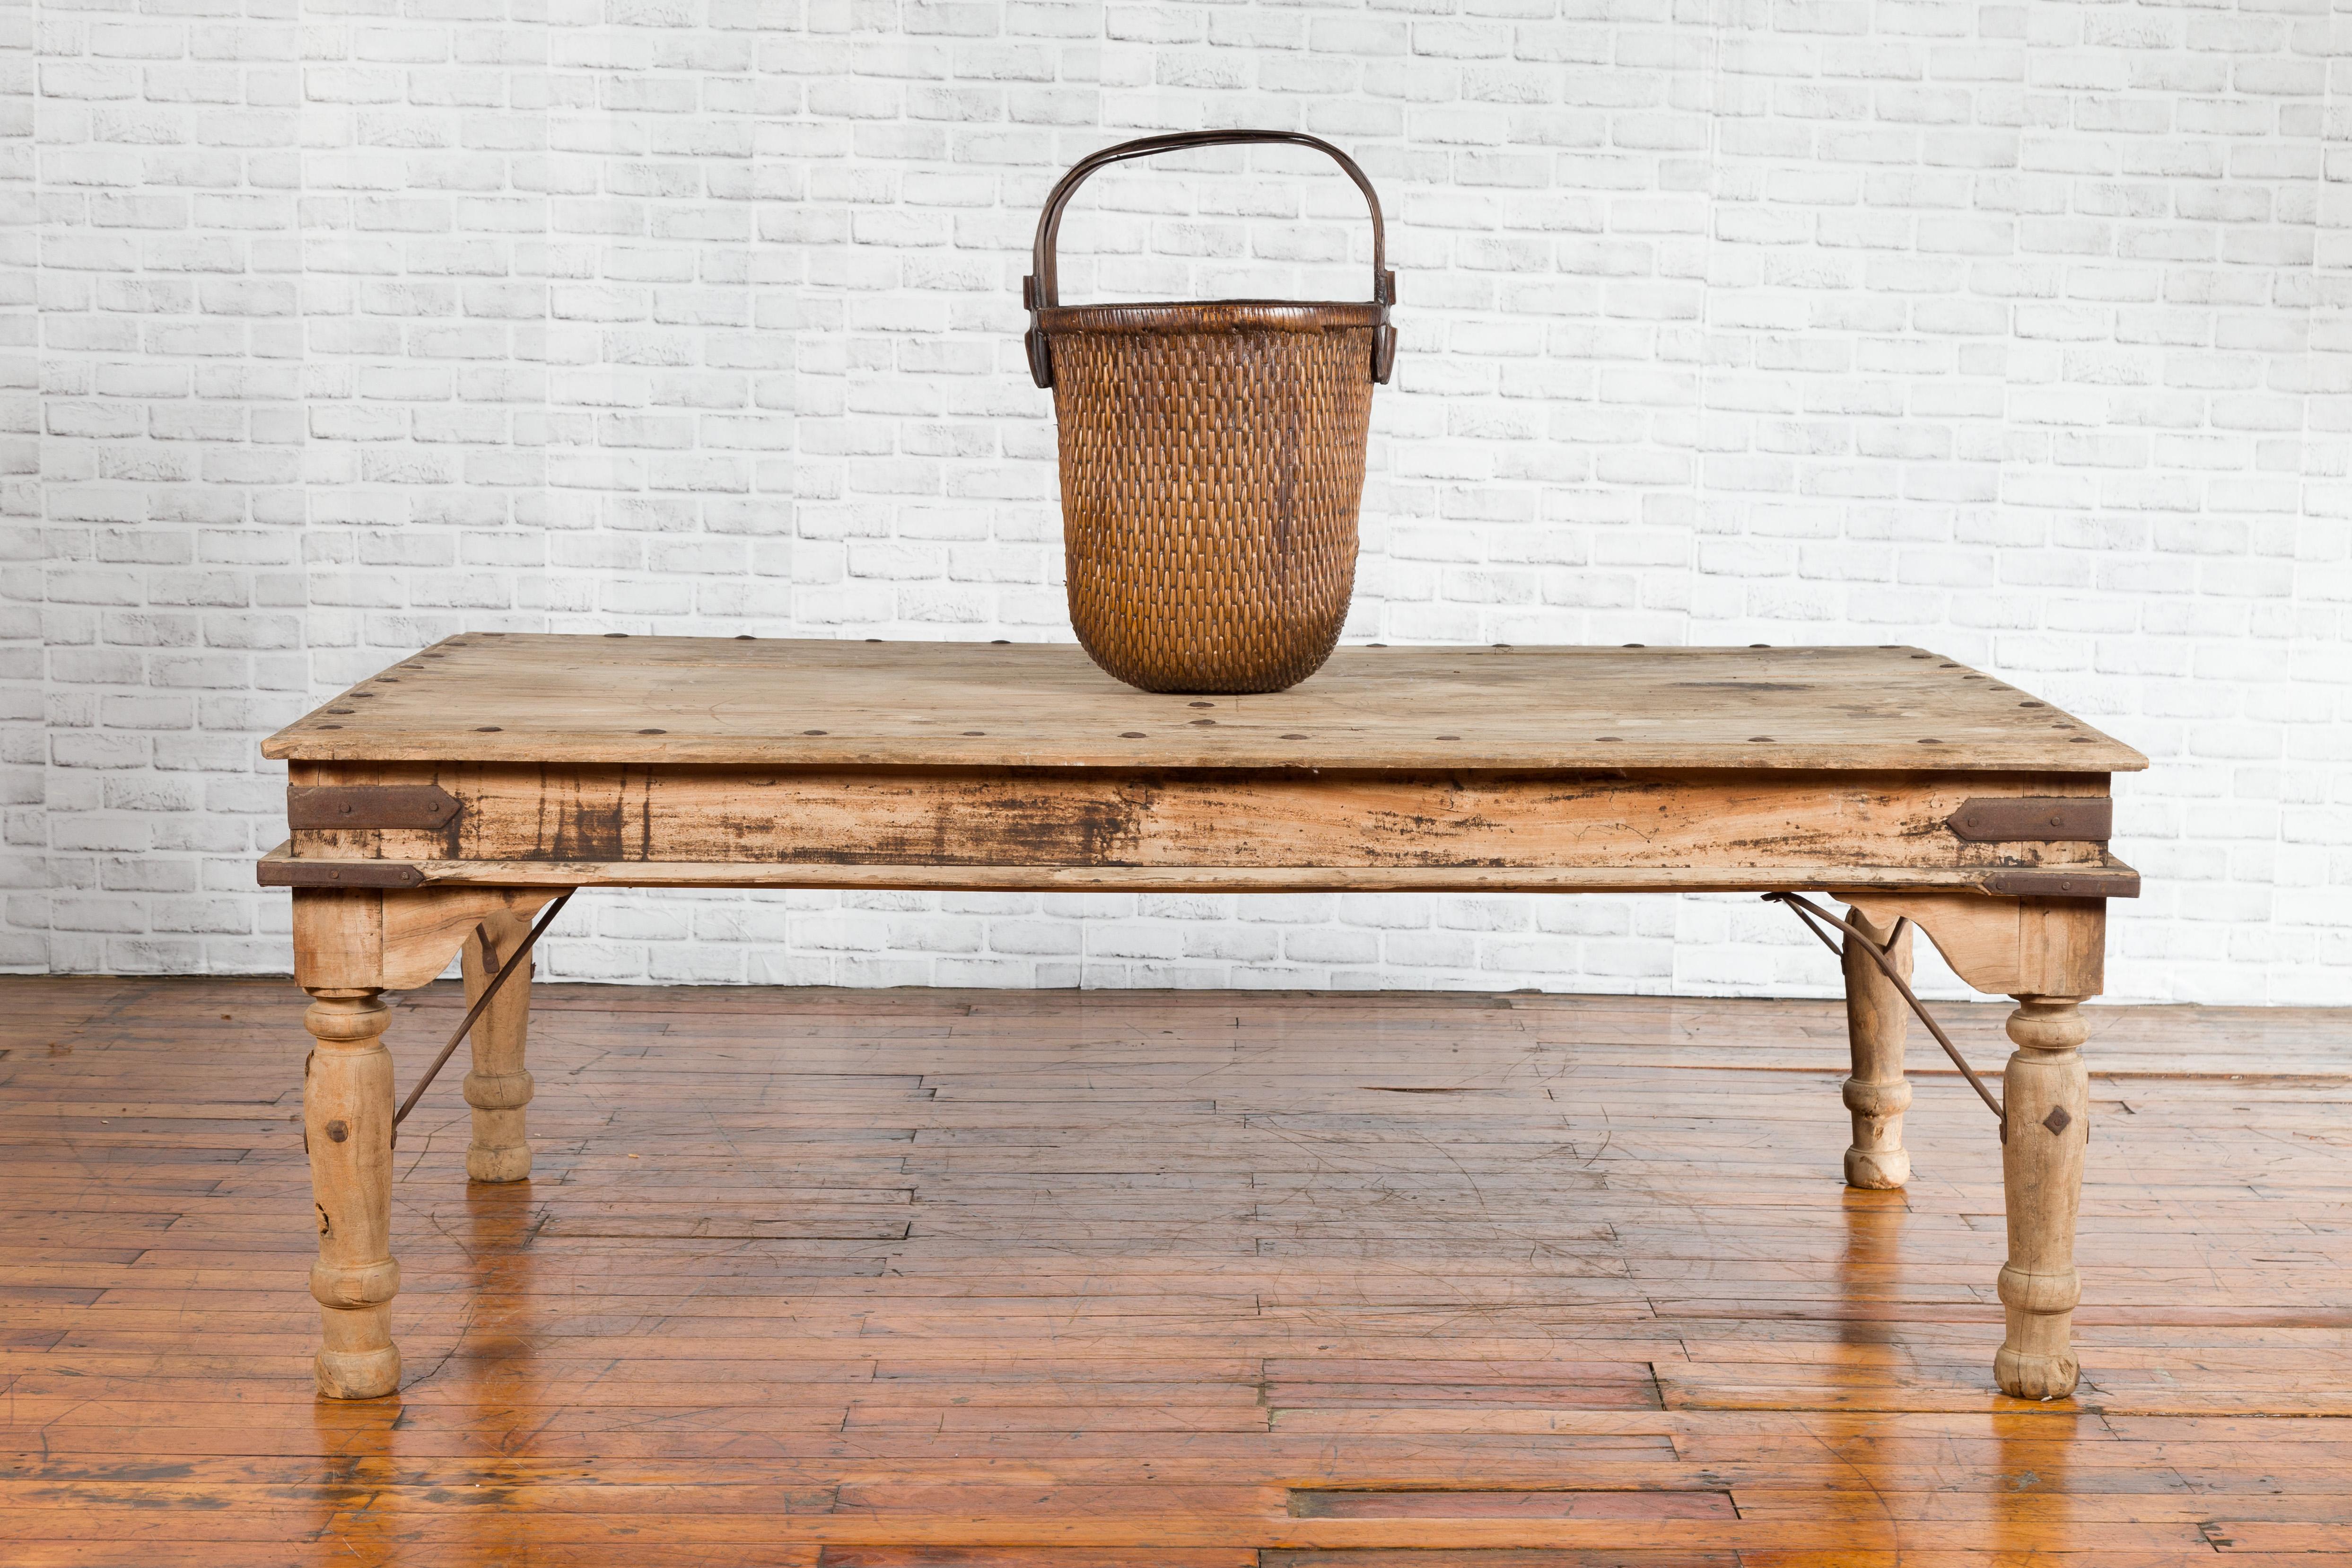 Rustic Indian Low Table with Distressed Patina, Iron Details and Baluster Legs In Good Condition For Sale In Yonkers, NY